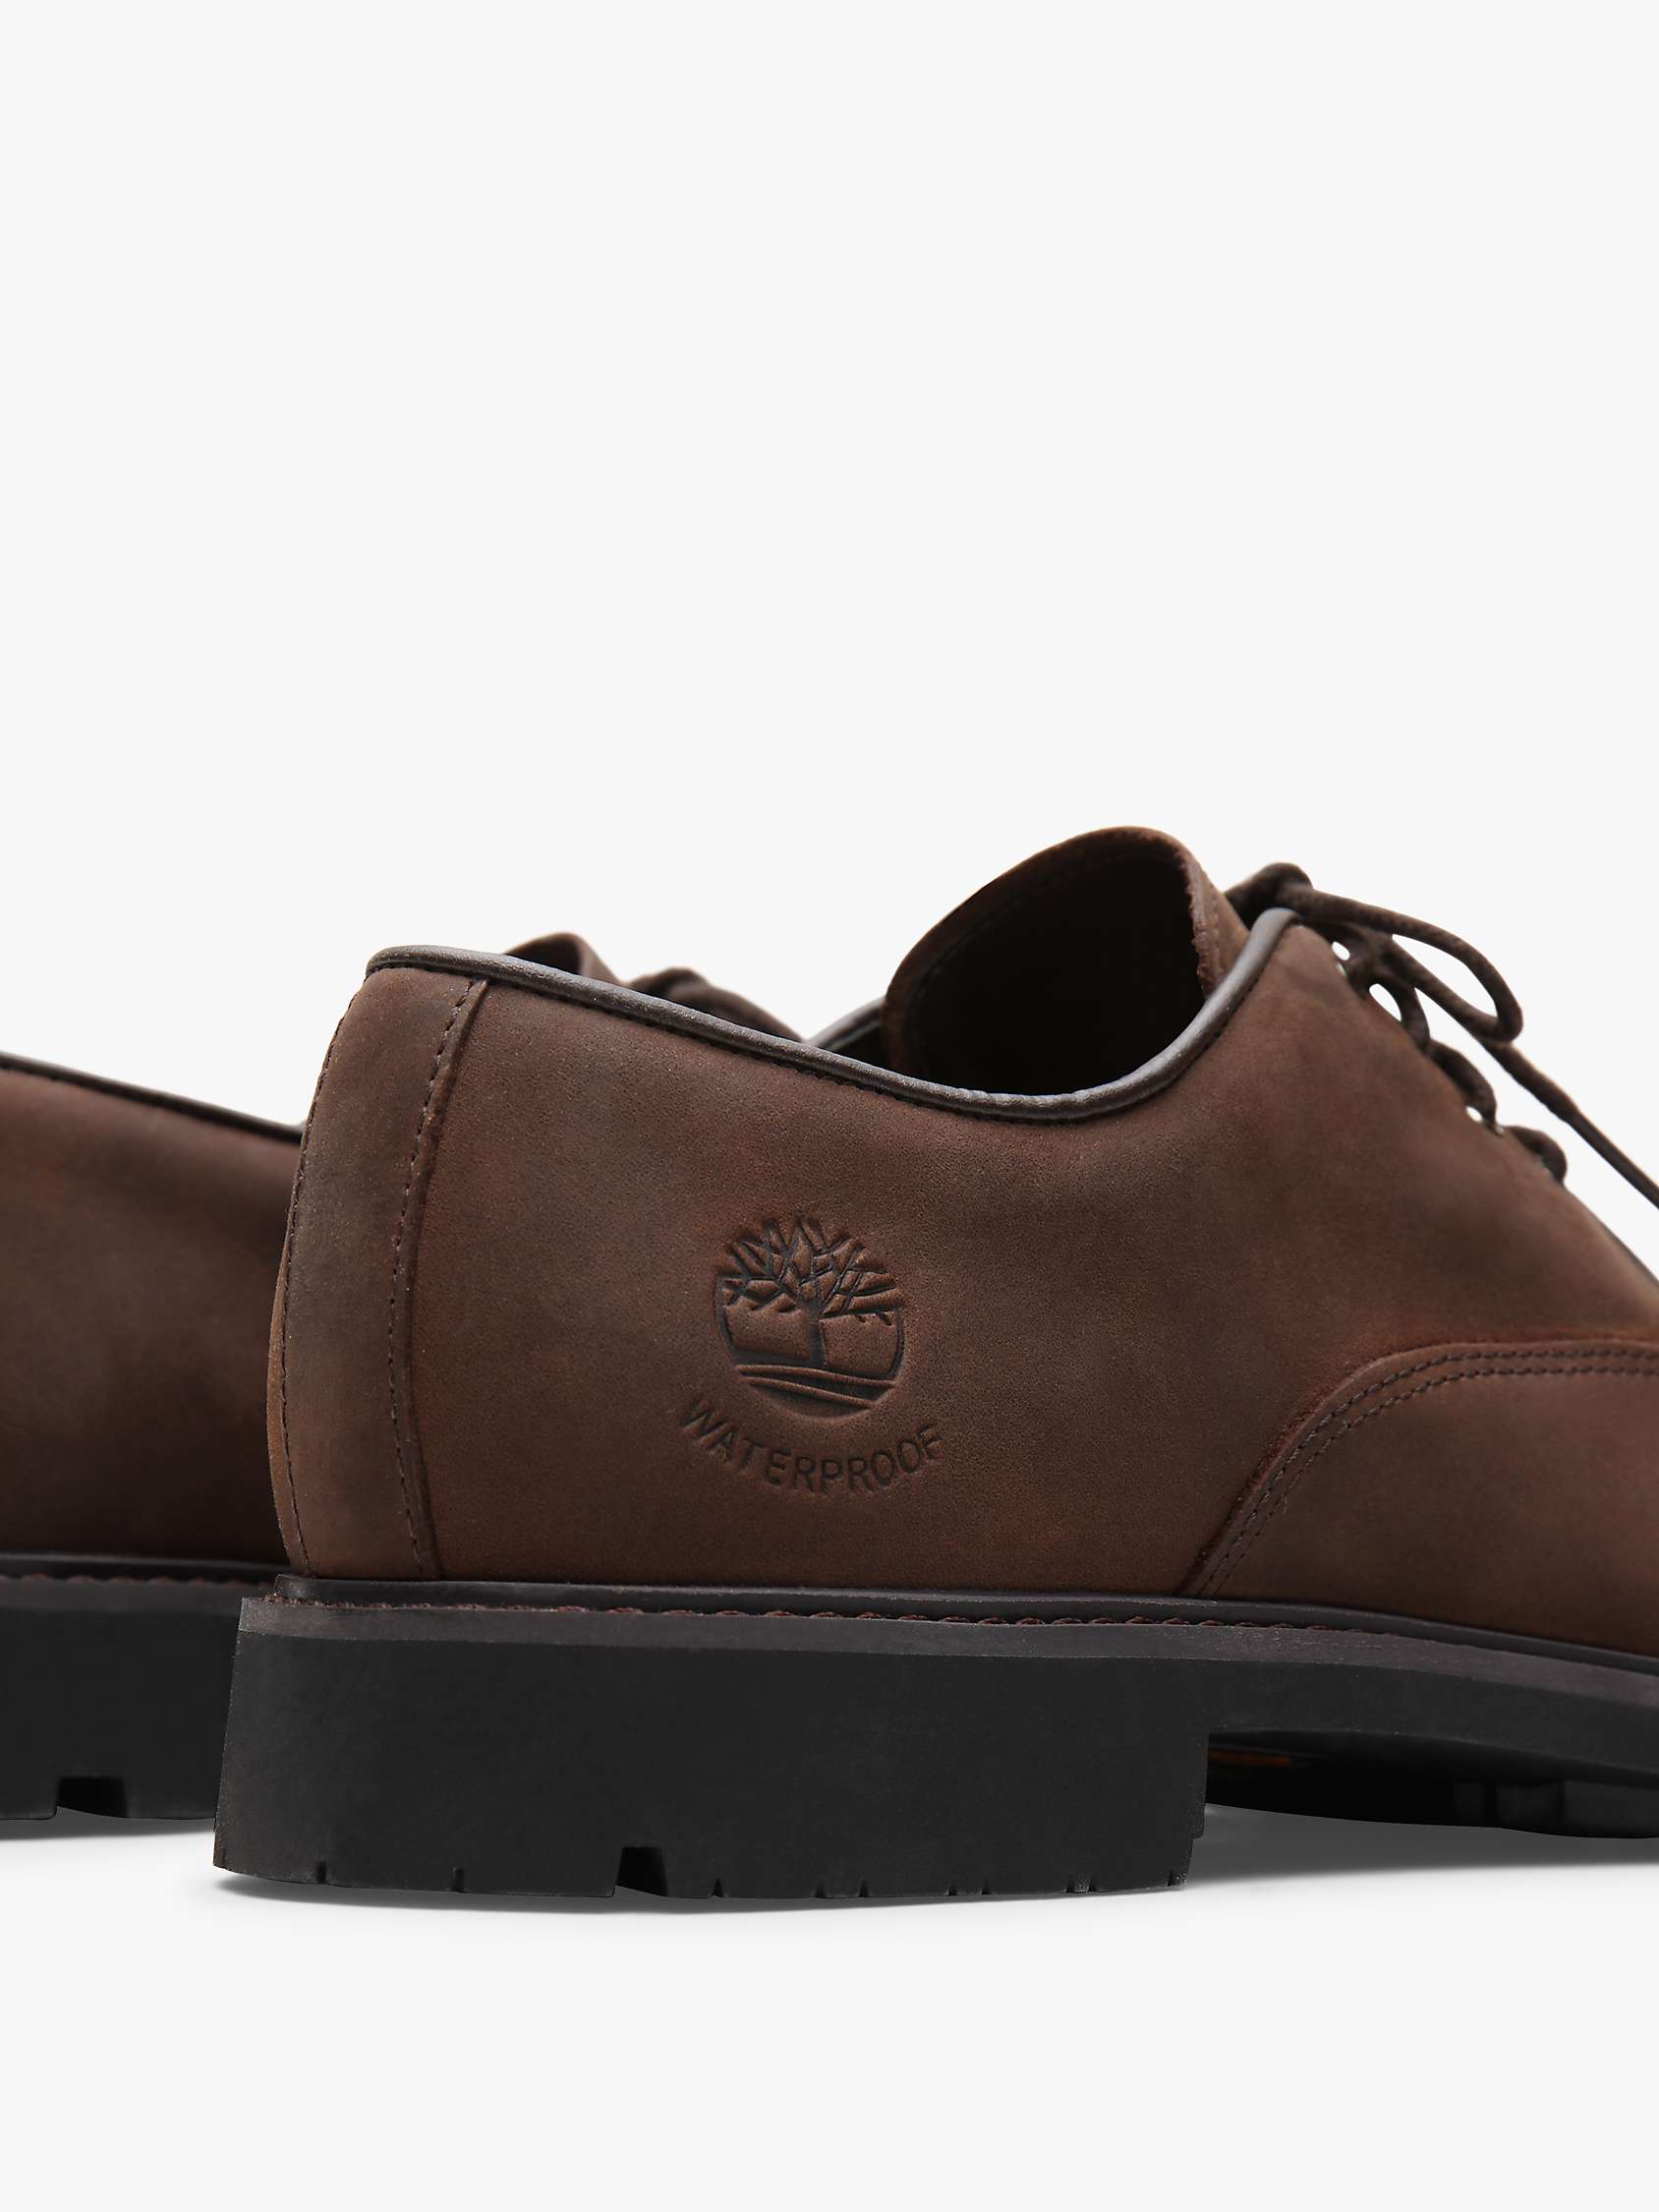 Timberland Earthkeepers Stormbuck Plain Toe Oxford In Black For Men ...